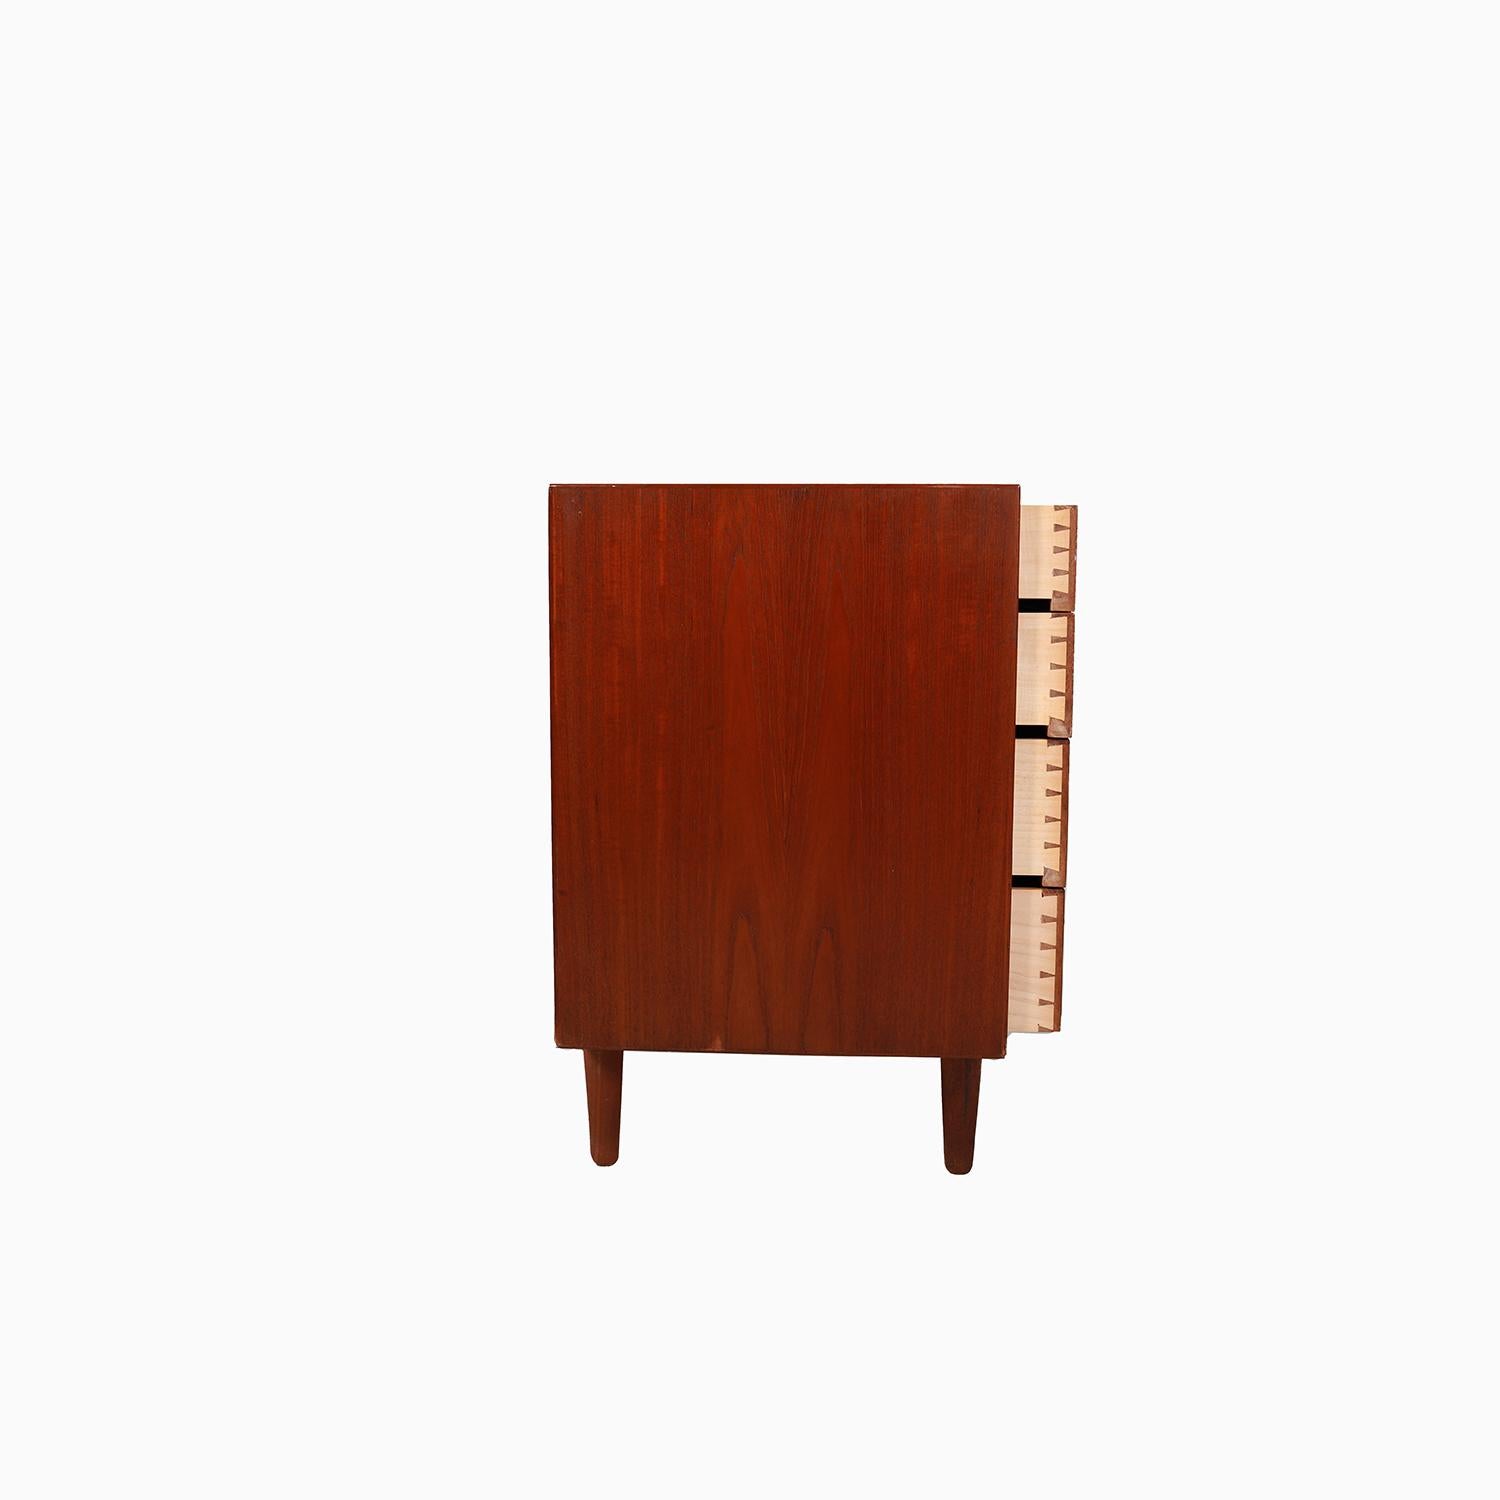 Erik Worts Teak Occasional Chest In Good Condition For Sale In Minneapolis, MN